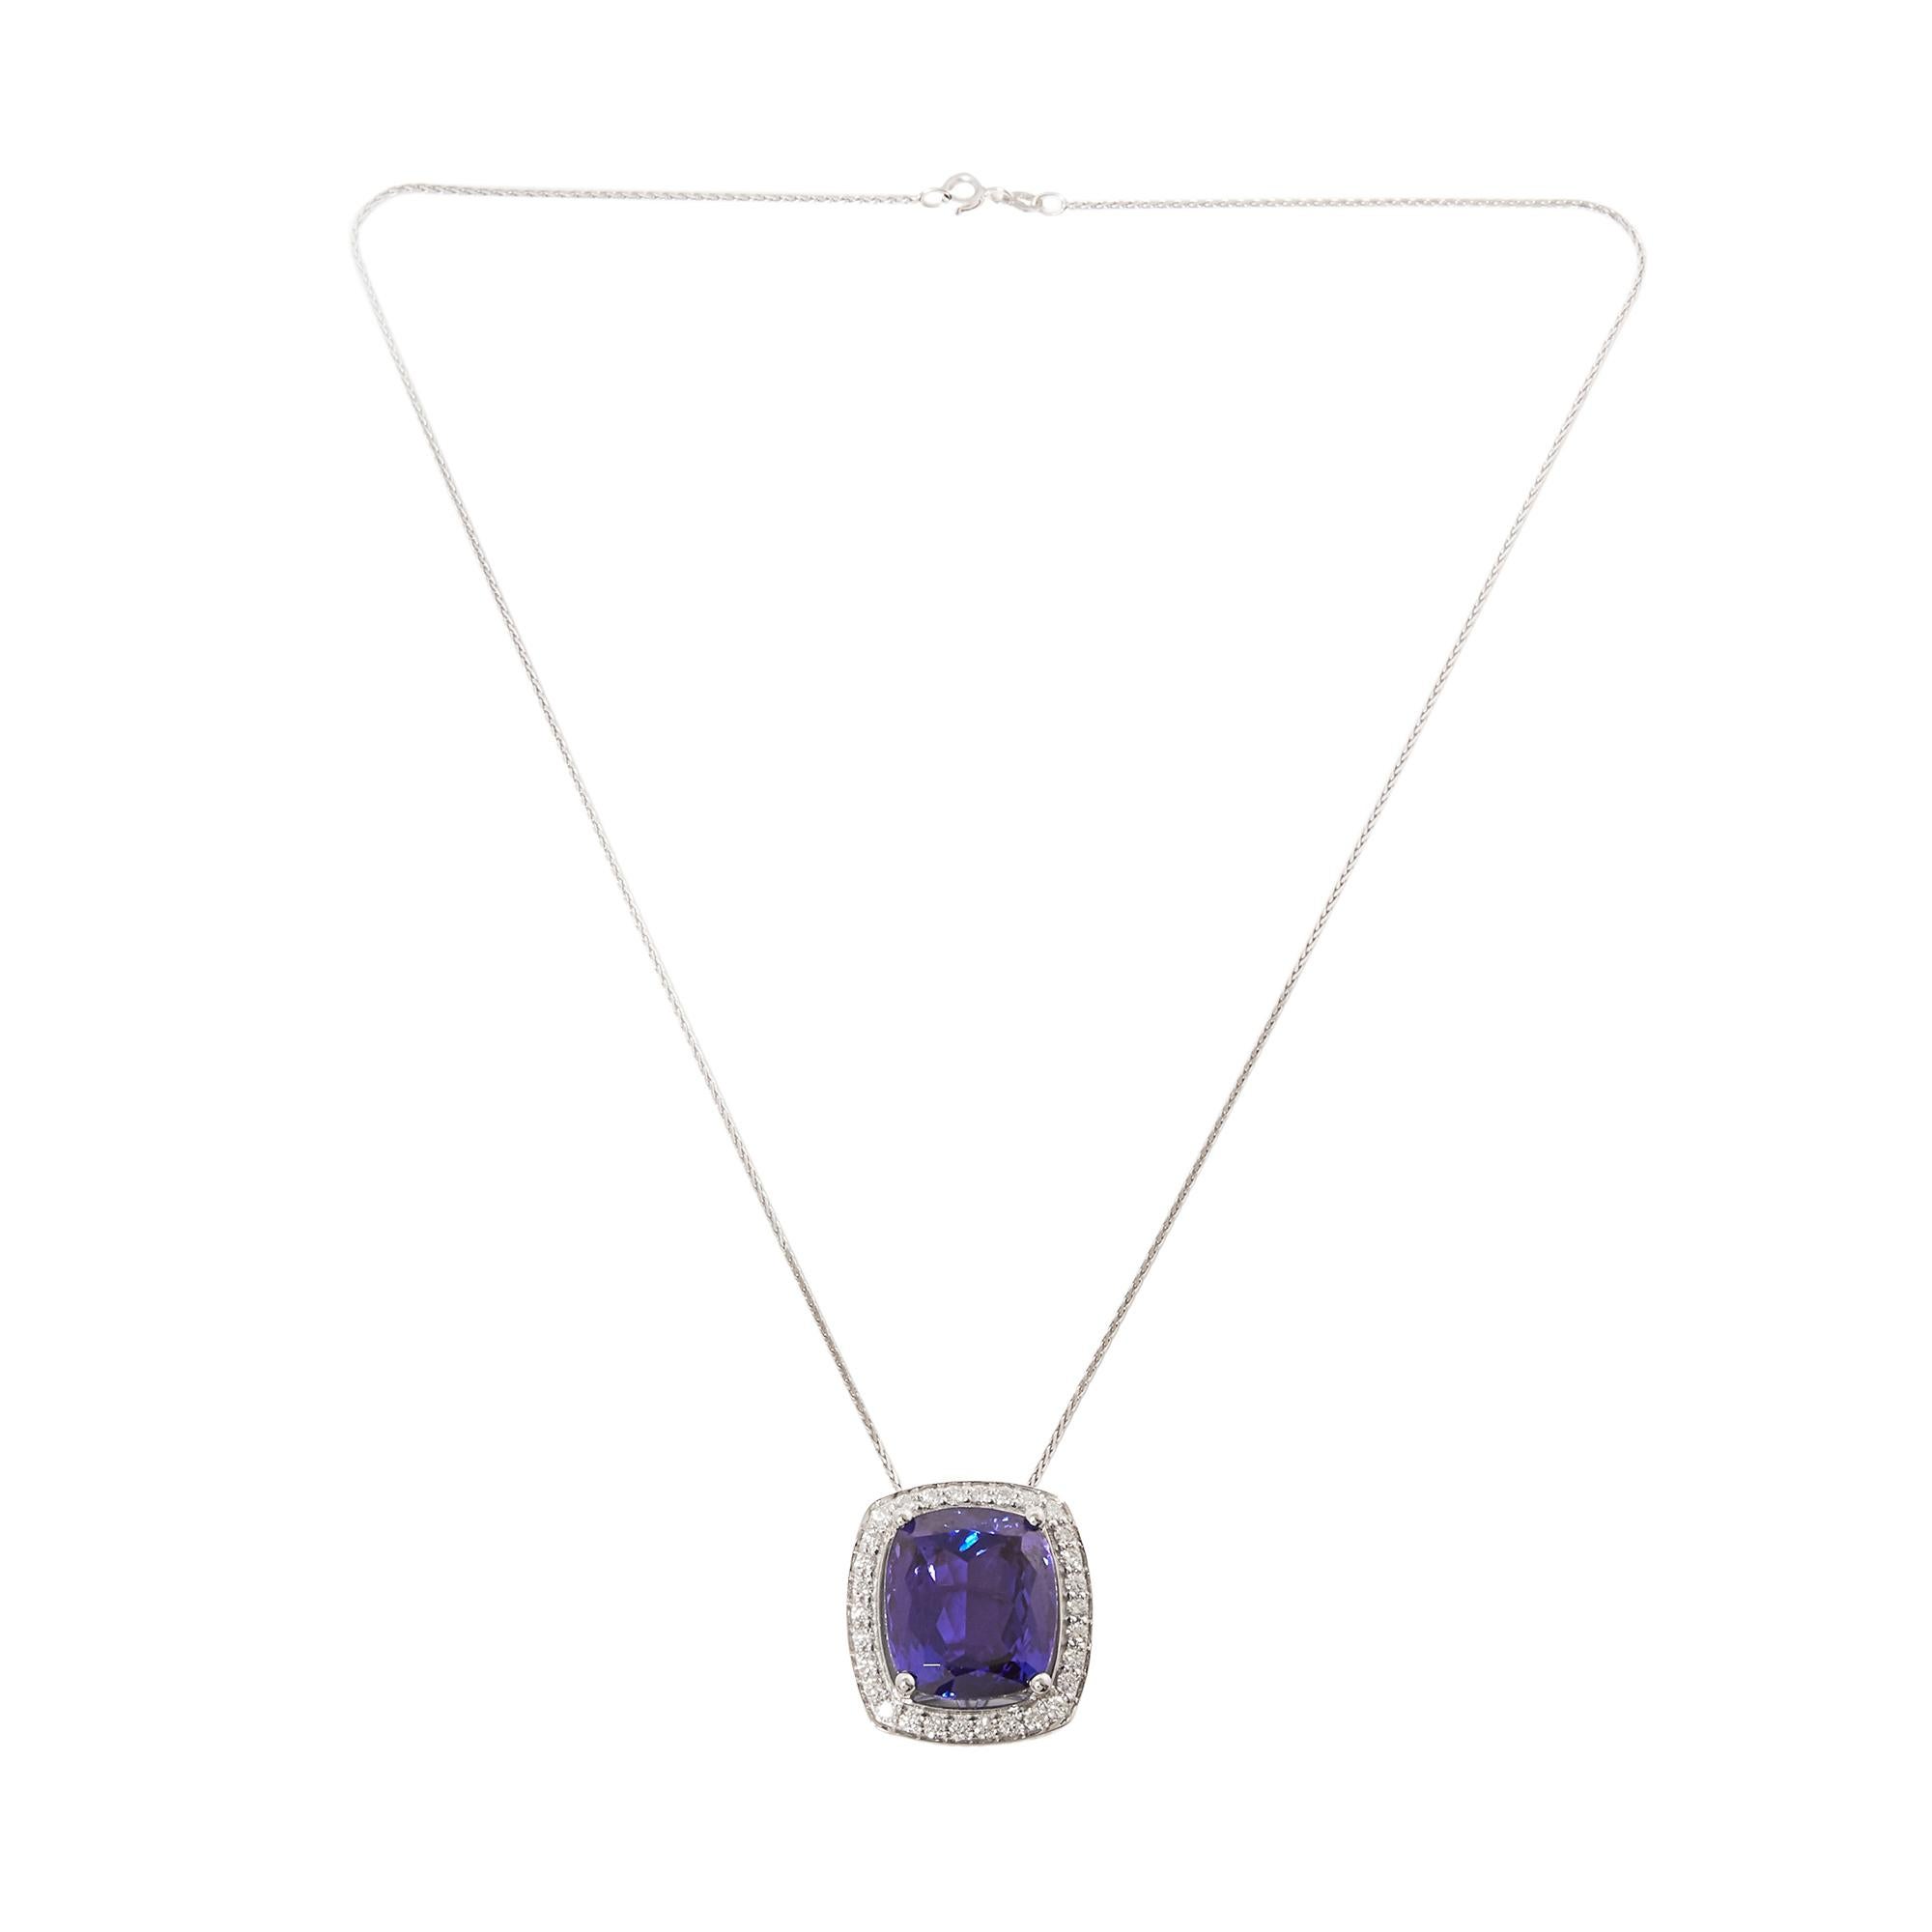 This pendant designed by David Jerome is from his private collection and features one cushion cut tanzanite totalling 25.56ct sourced in the D Block mine in Tanzania. Set with round brilliant cut diamonds totalling 1.03ct mounted in an 18k white